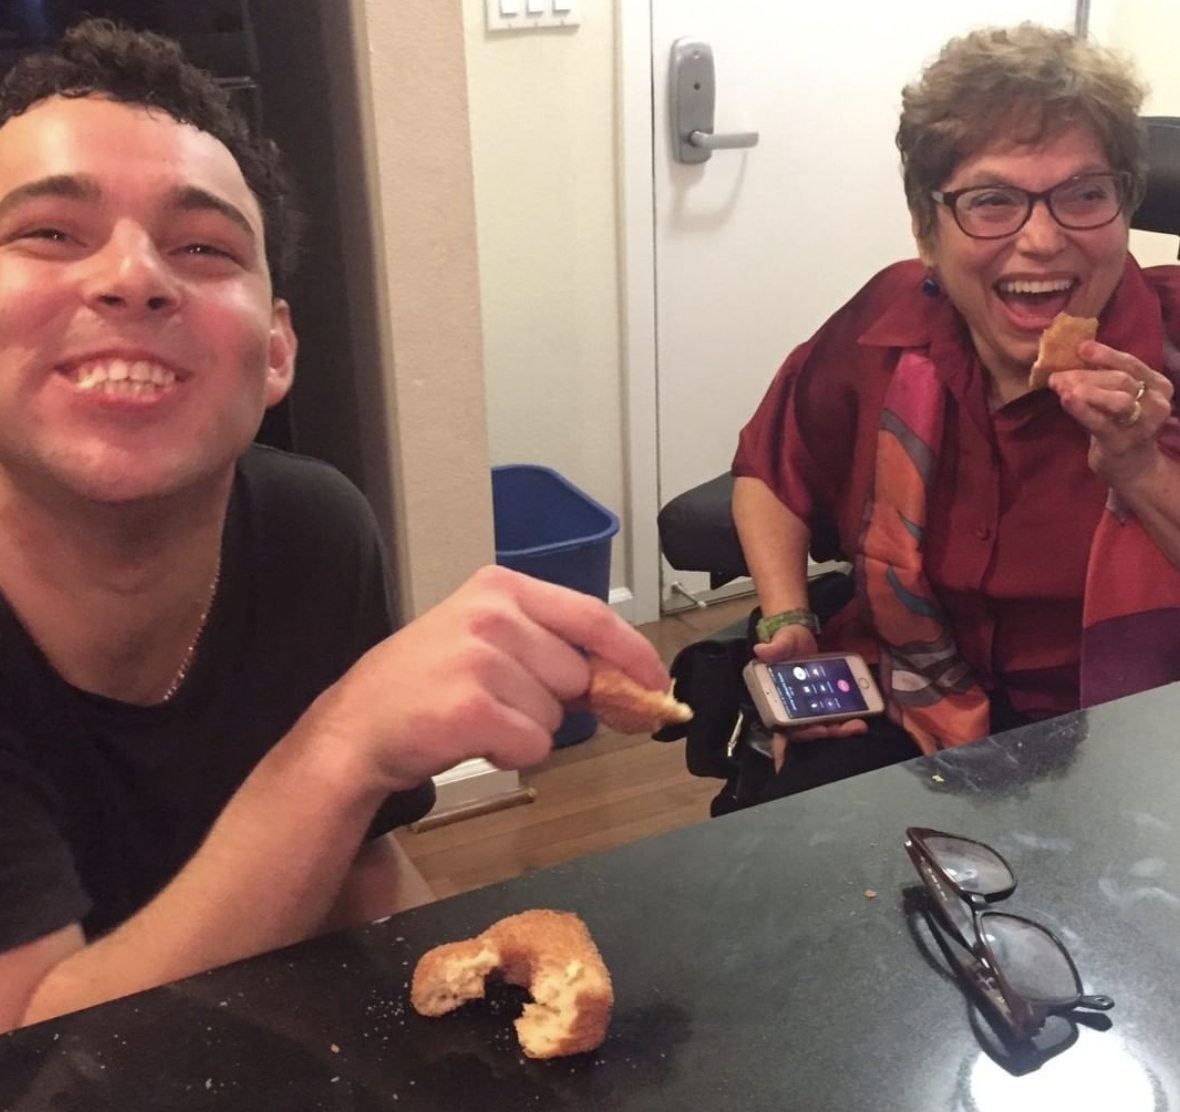 Reid and Judy laughingly eat donuts. Photo source: Reid Davenport